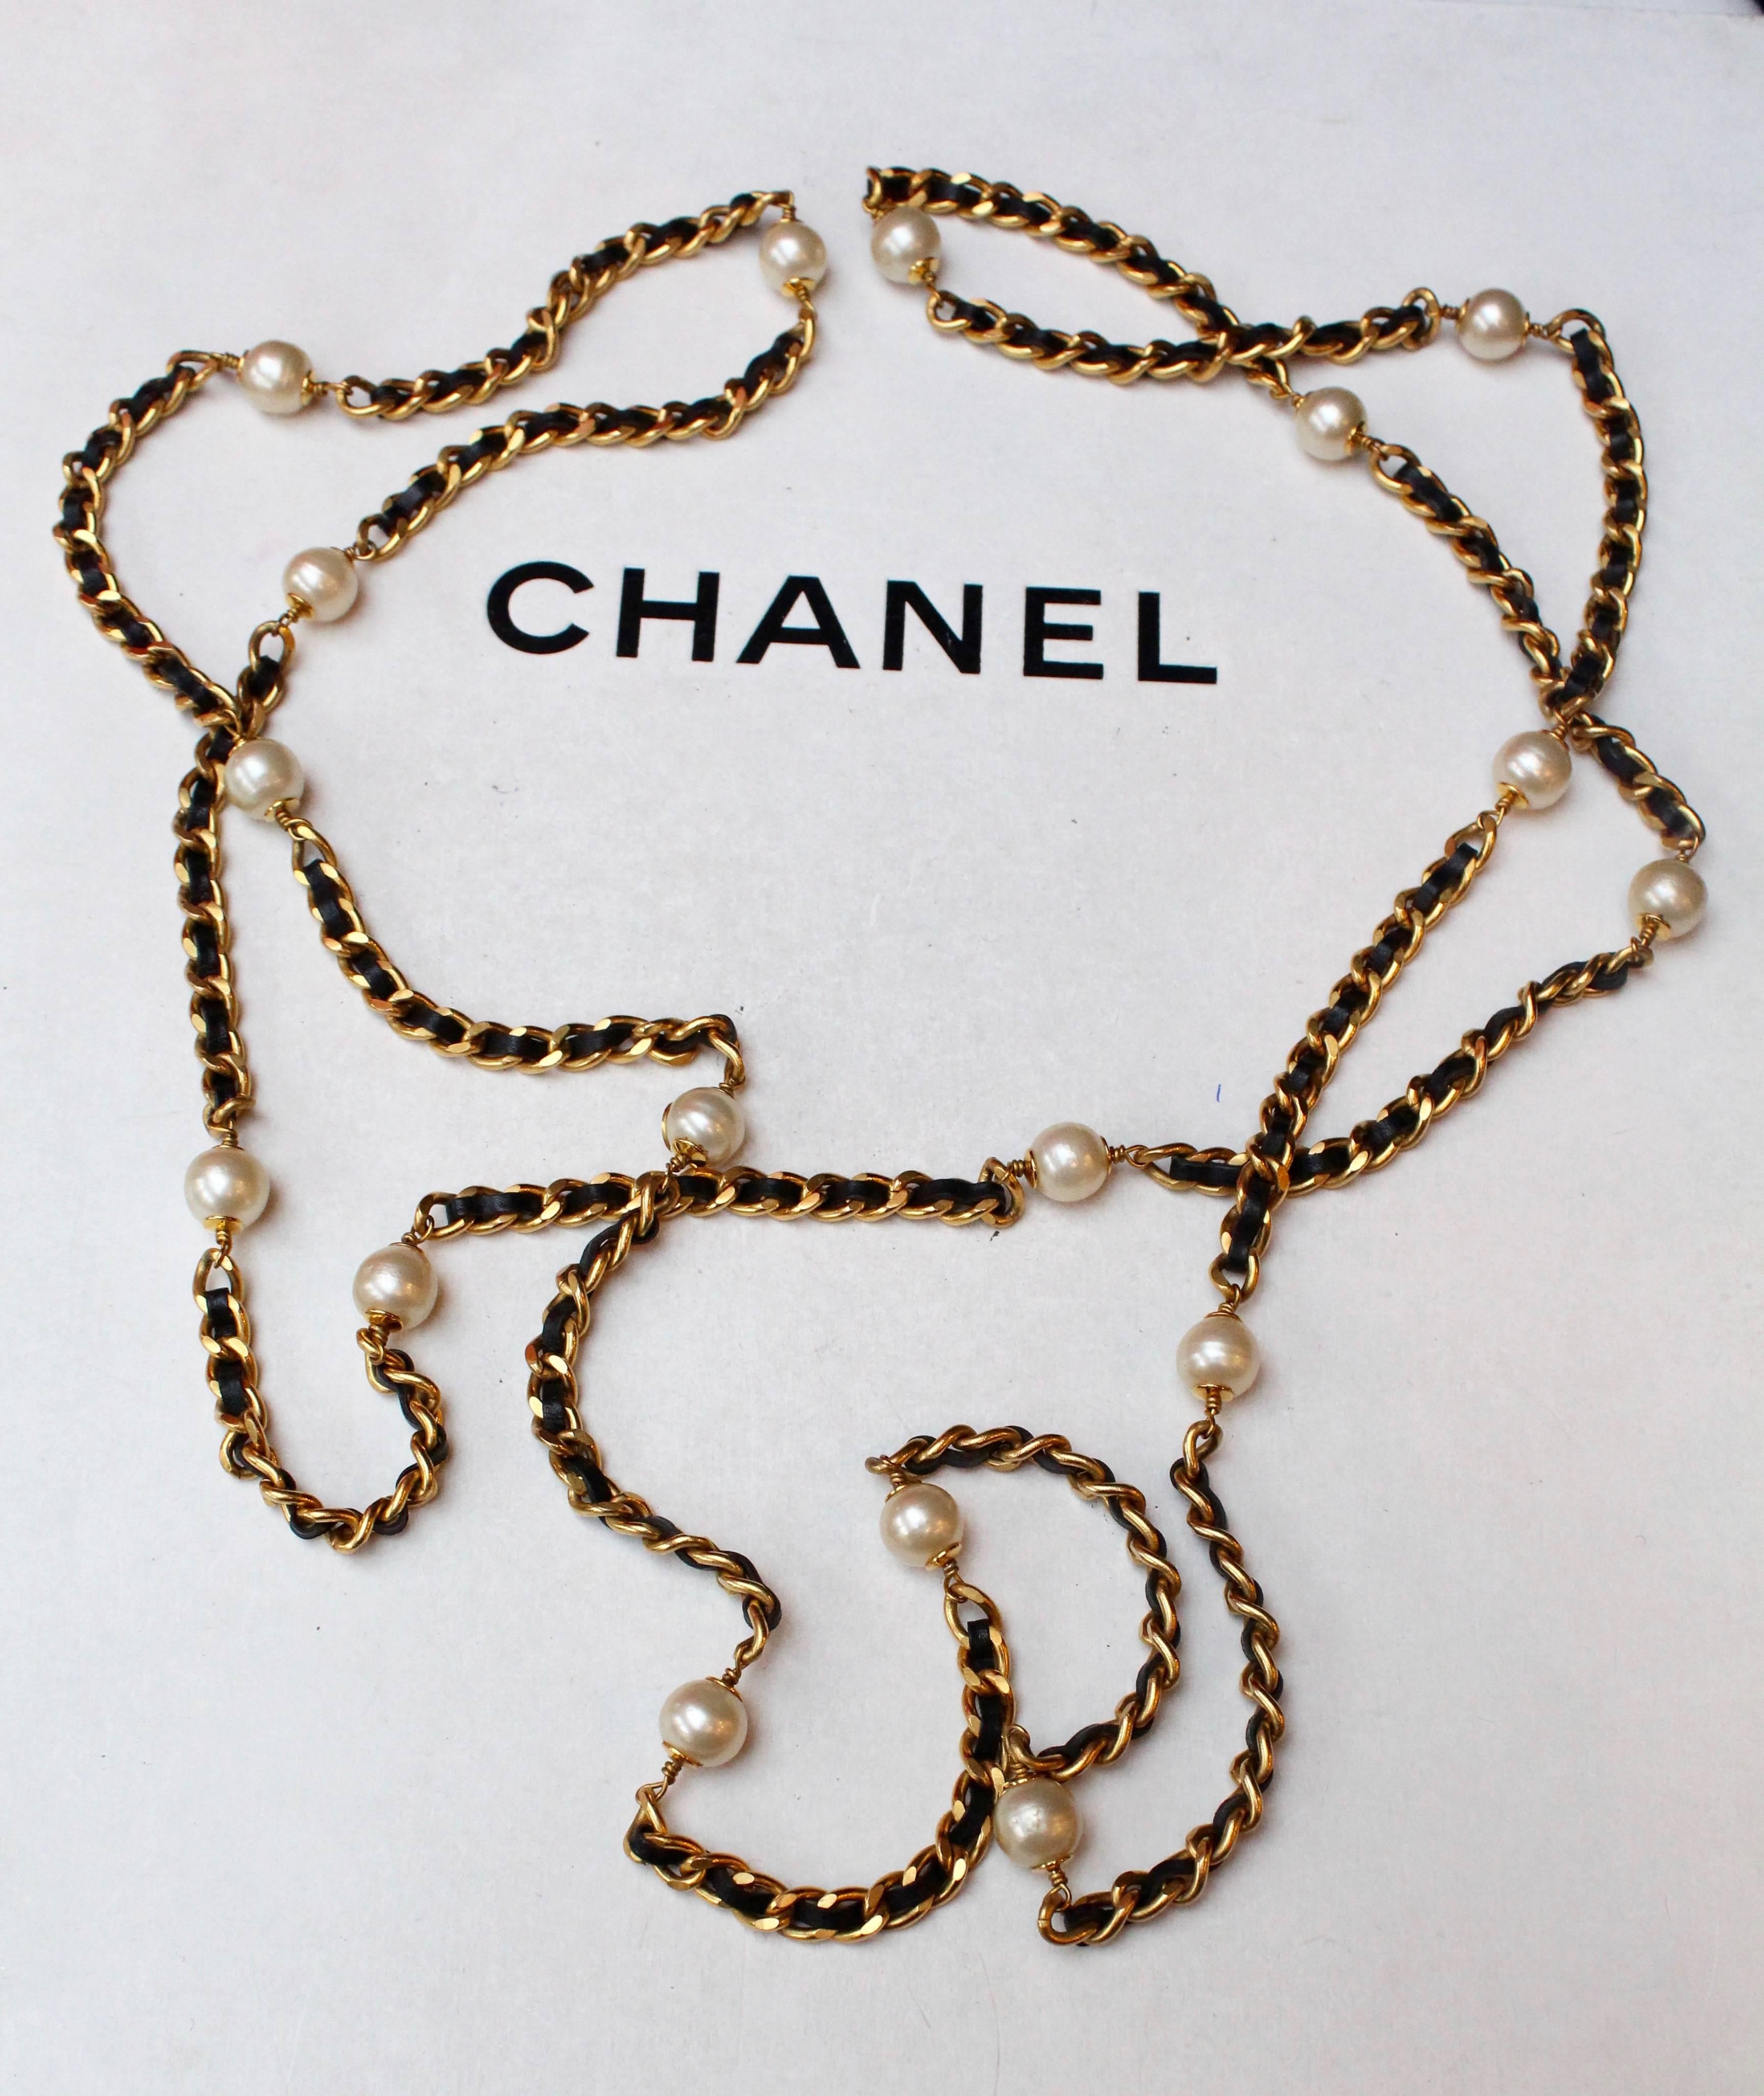 Chanel long chain sautoir composed of black leather and gilded metal chain, 1993 1